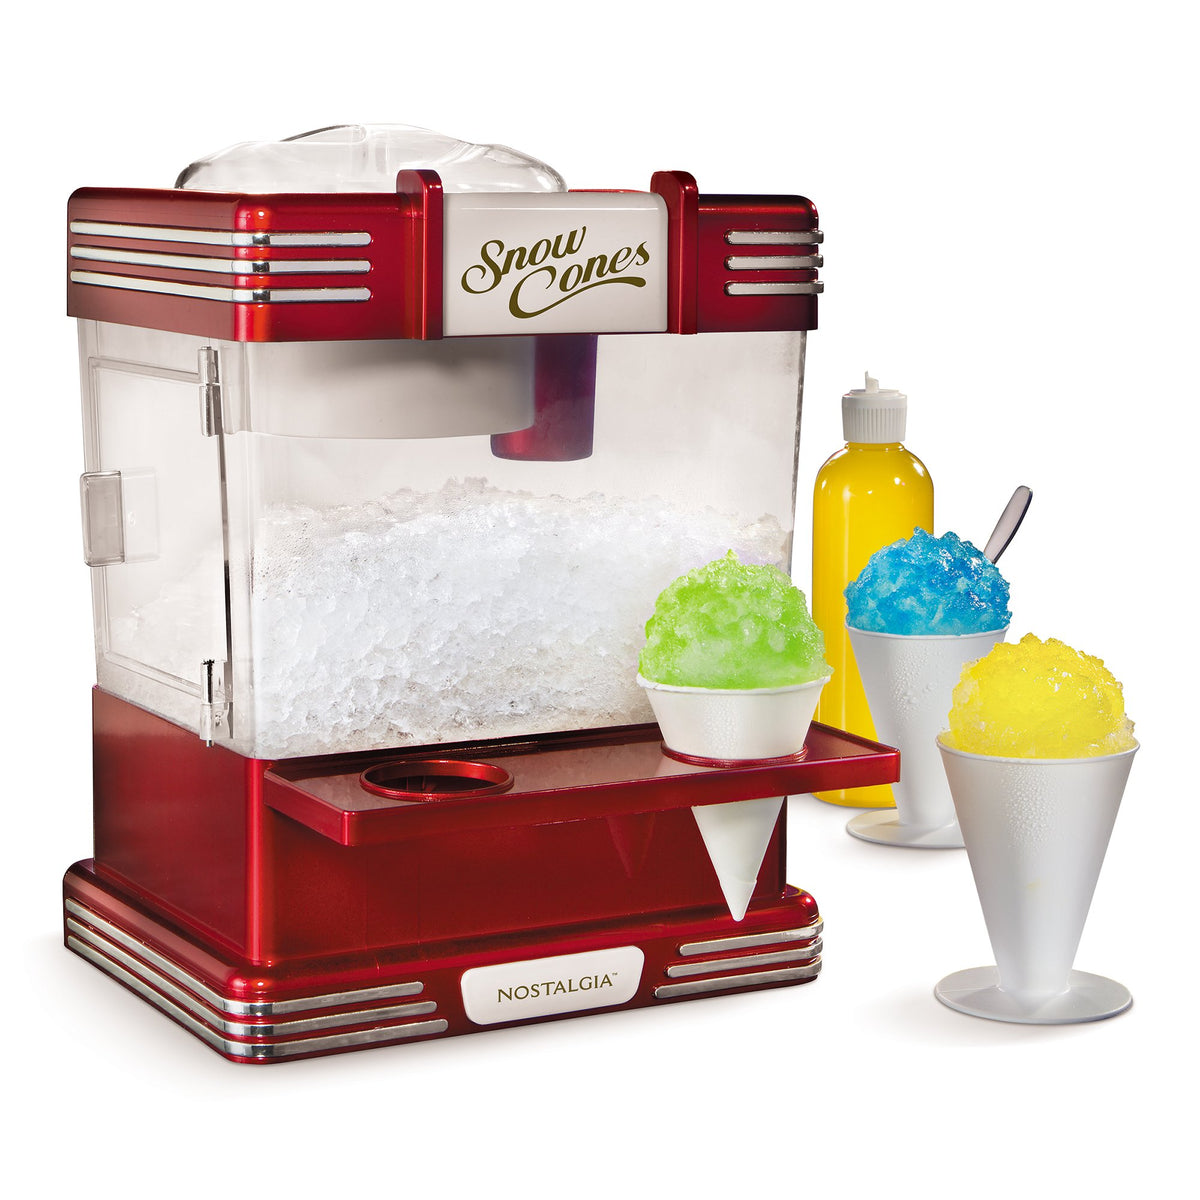 Enjoy fluffy, light-as-snow shave ice with this nifty attachment